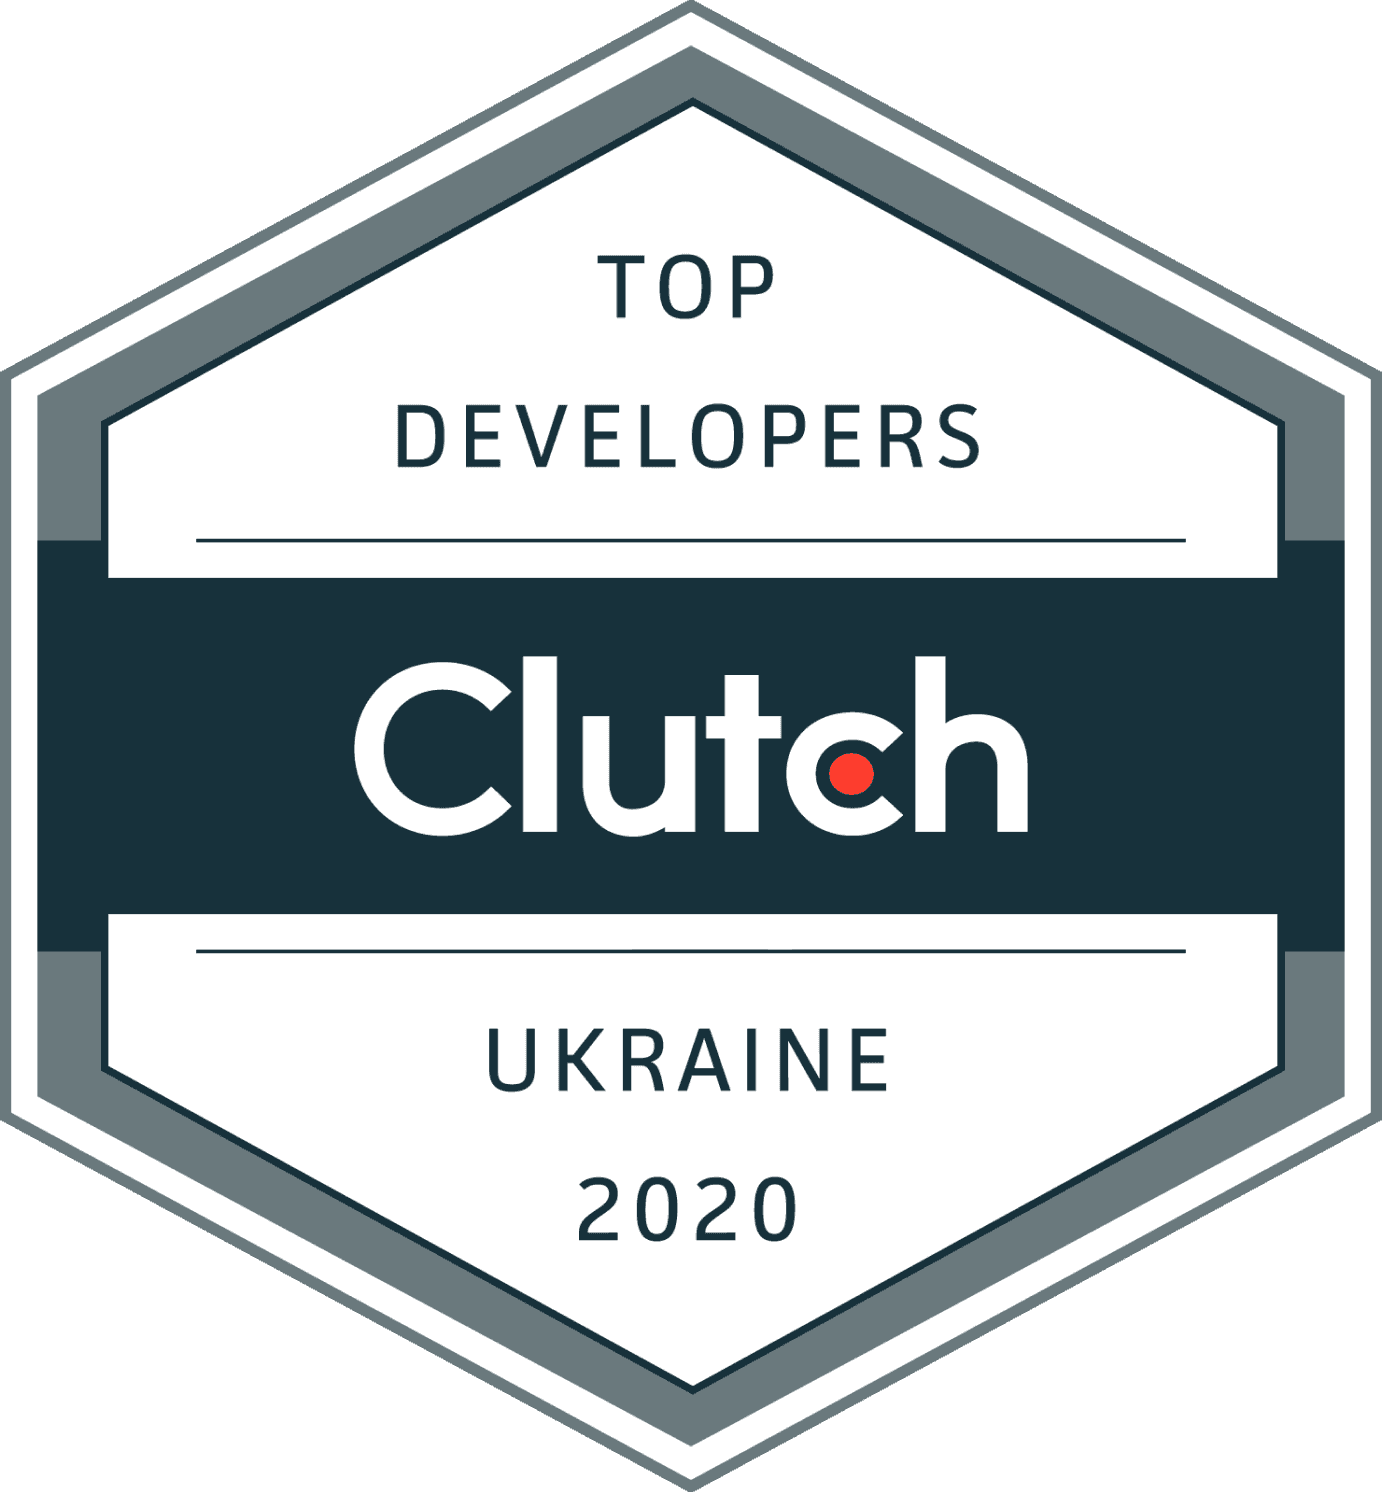 Top E-Commerce Developers in Ukraine 2020 by Clutch